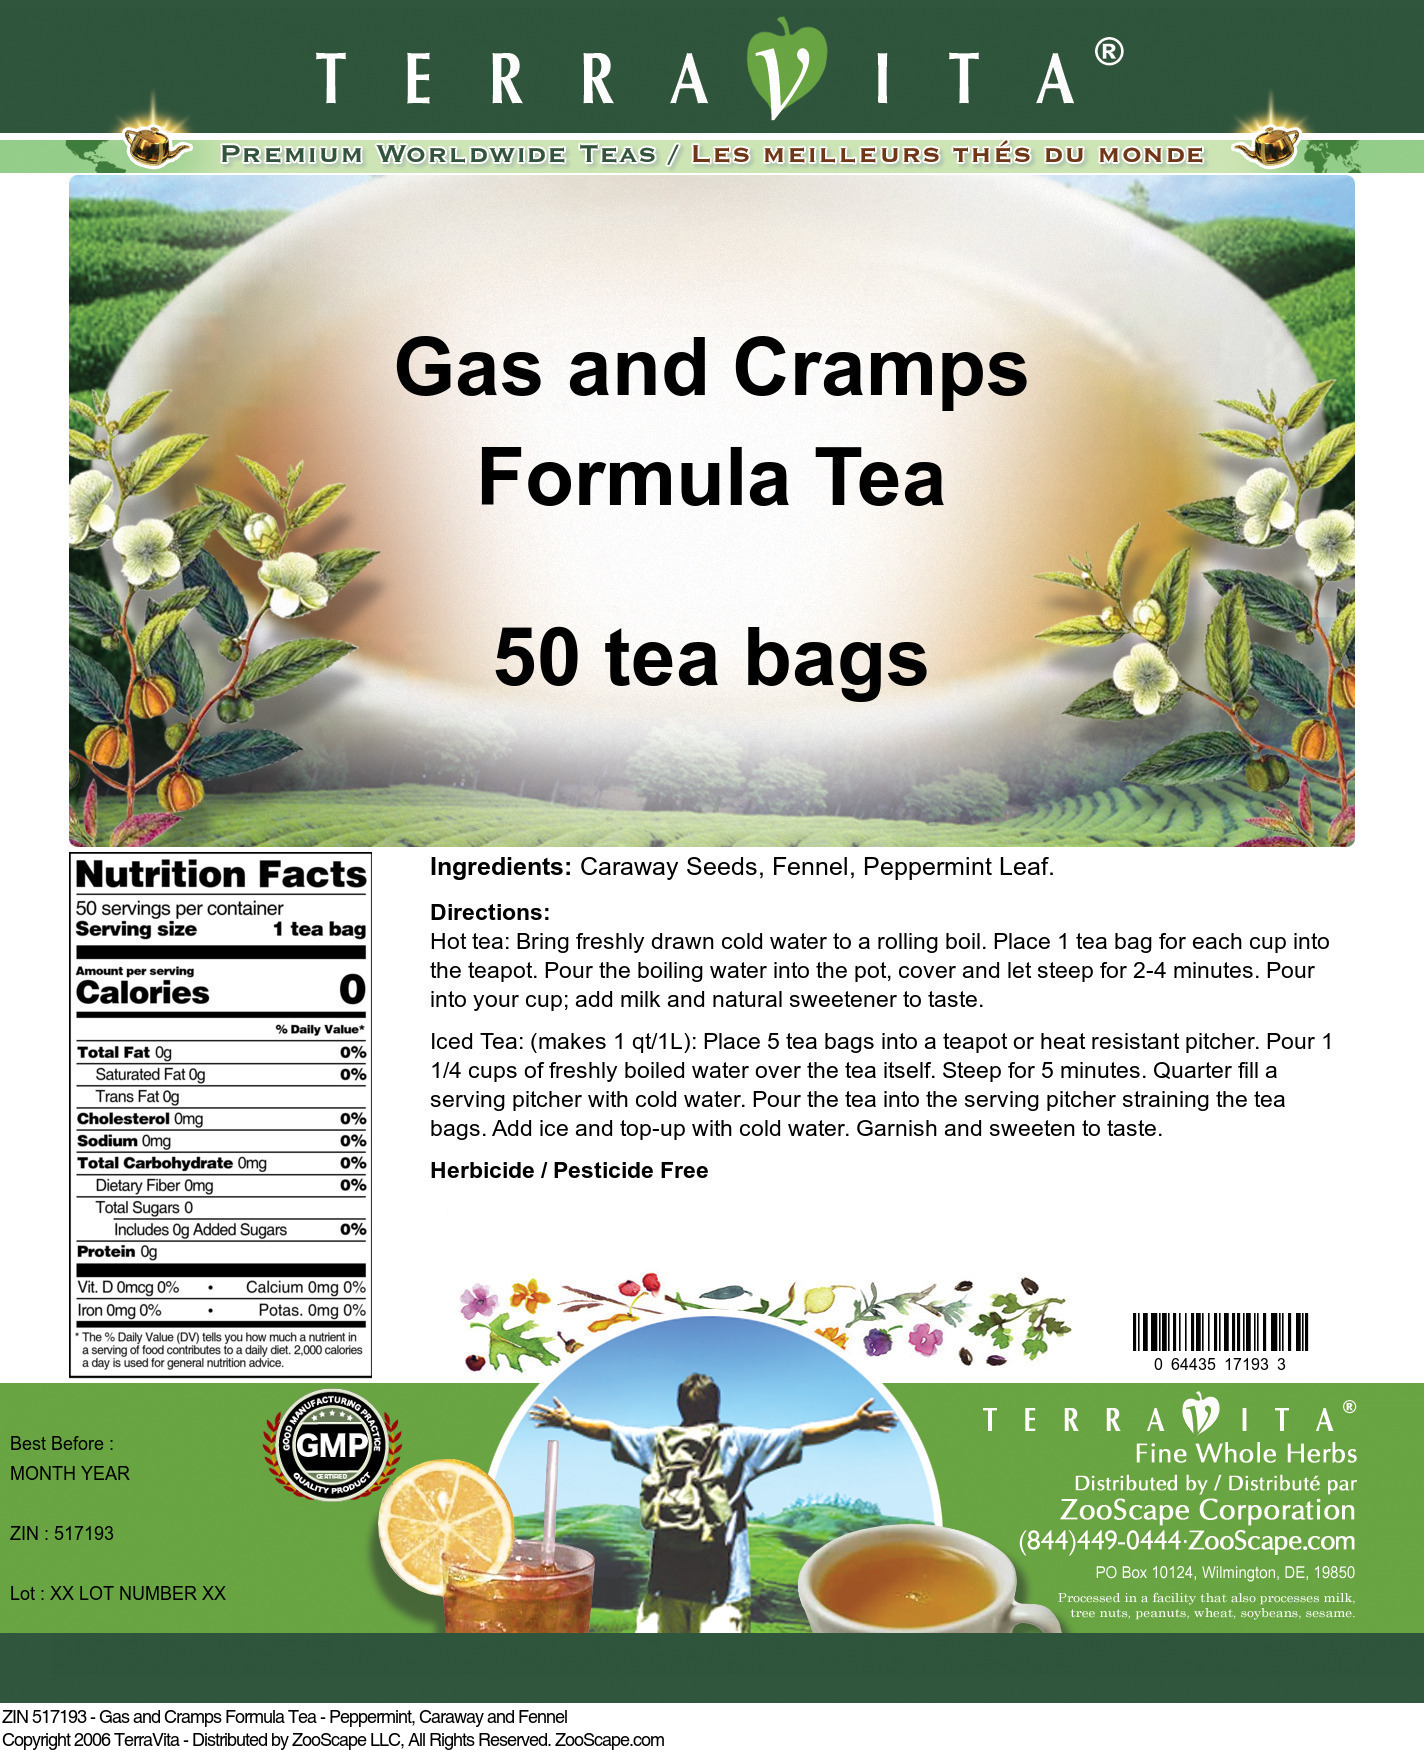 Gas and Cramps Formula Tea - Peppermint, Caraway and Fennel - Label